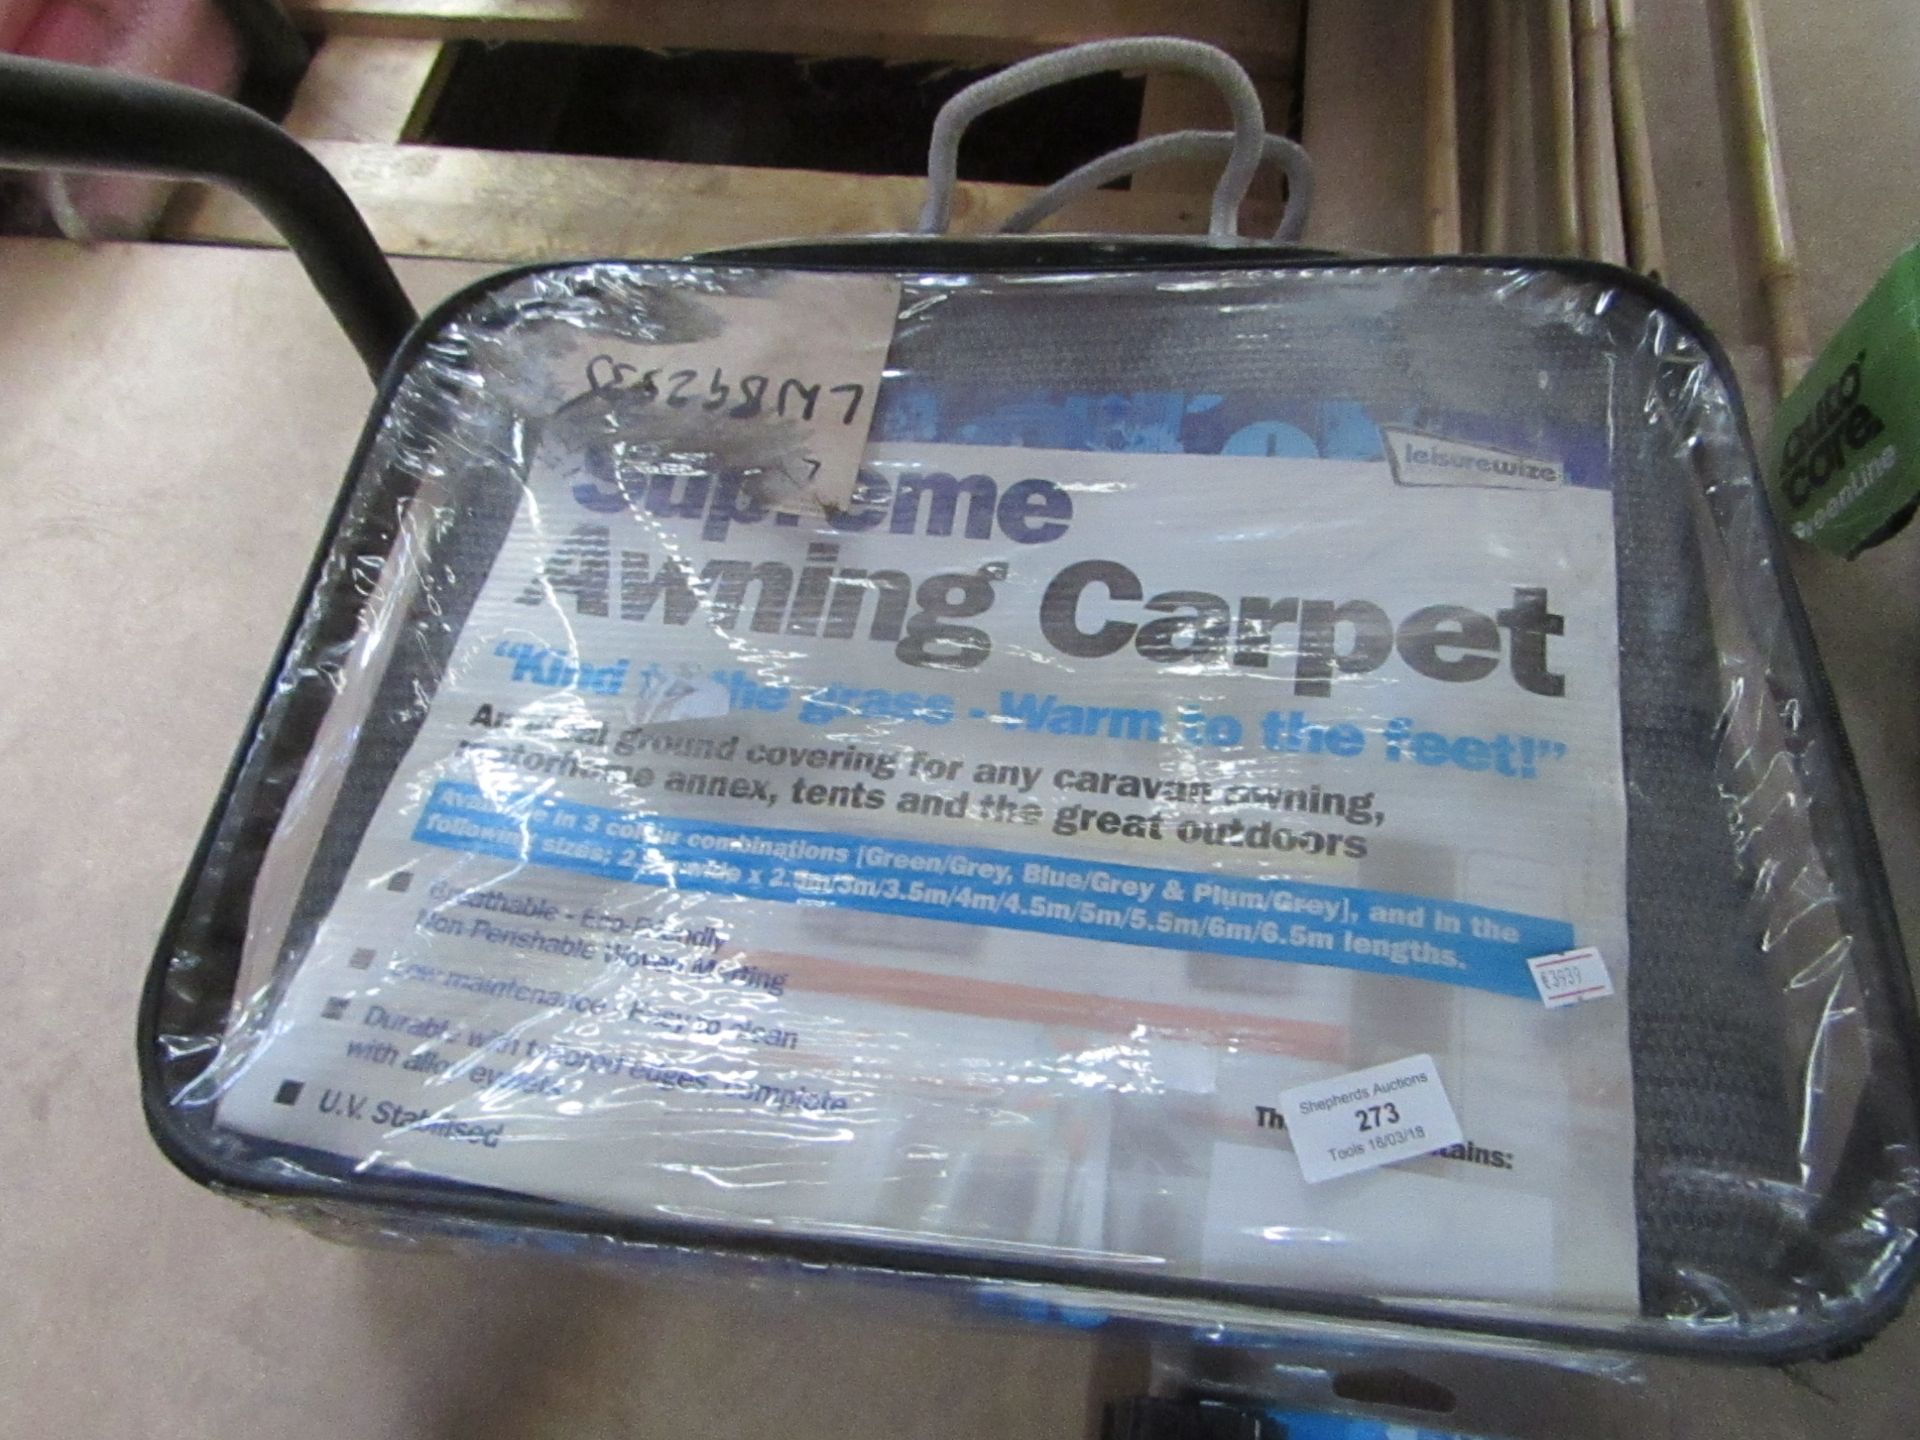 Leisurewize supreme awning carpet (2.5m x 5.5m), unused and unopened and in packaging